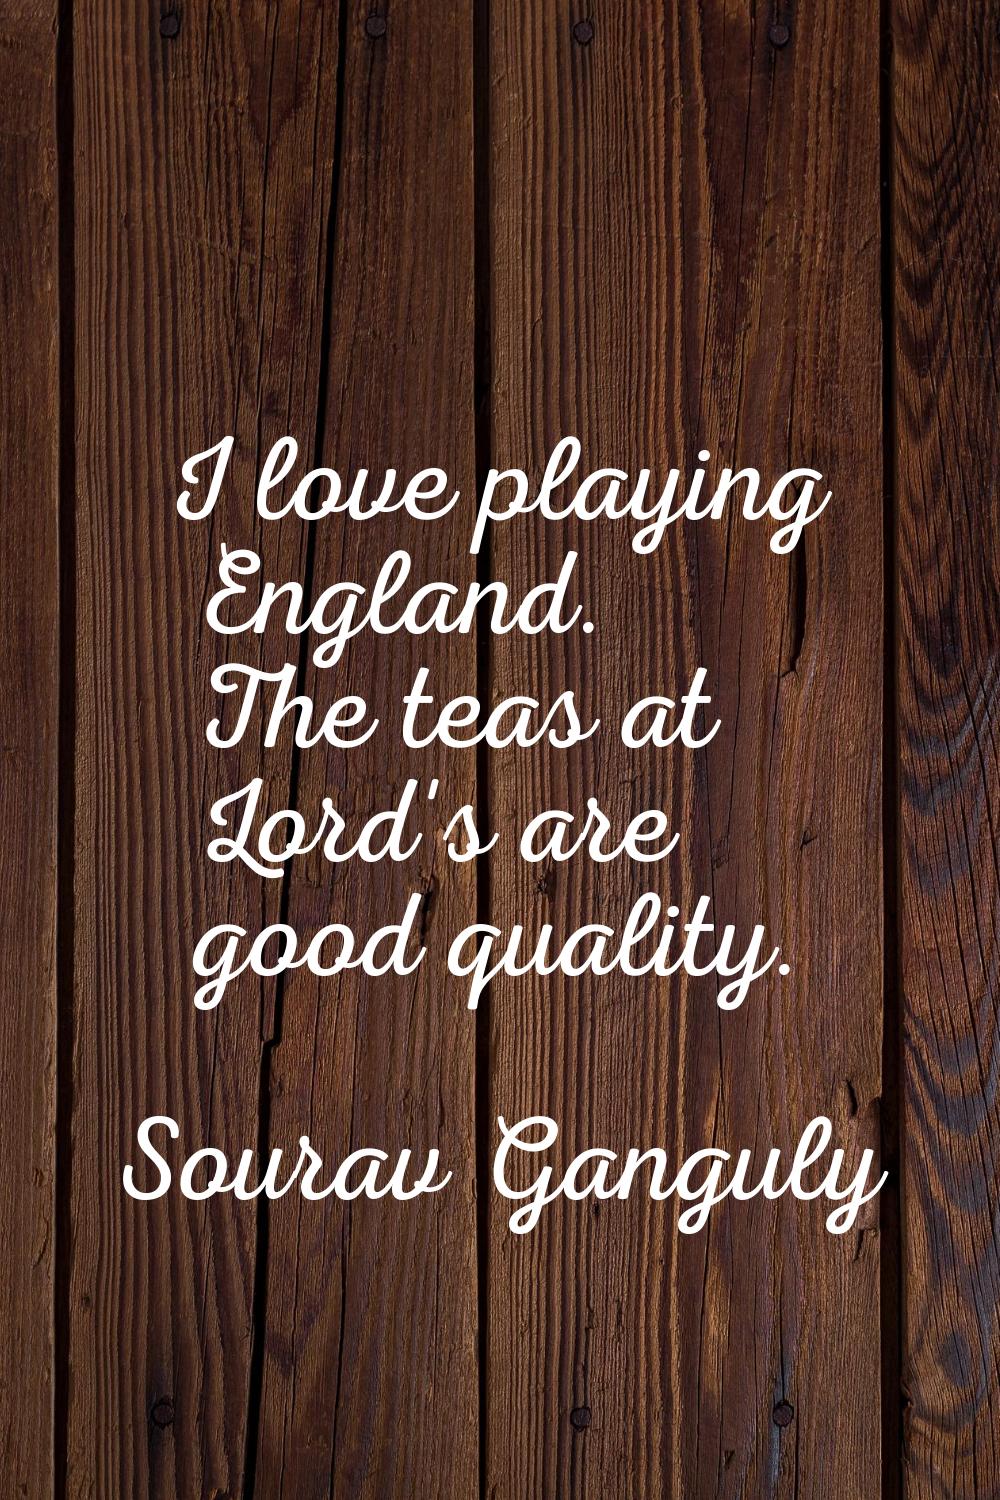 I love playing England. The teas at Lord's are good quality.